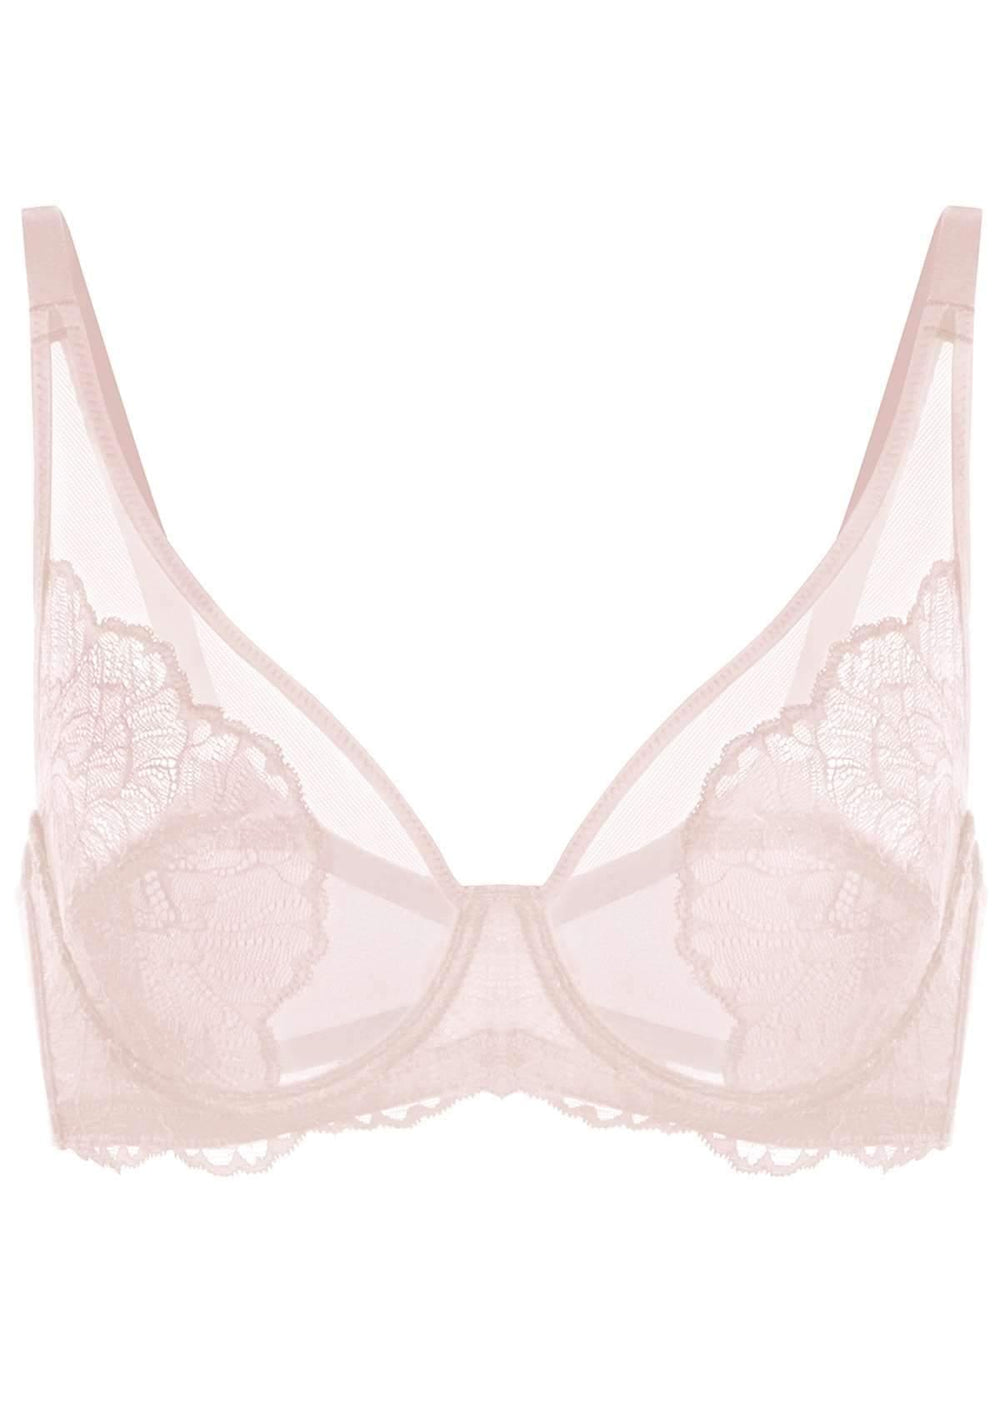 HSIA Blossom Lace Bra and Panties Set: Best Bra for Large Busts